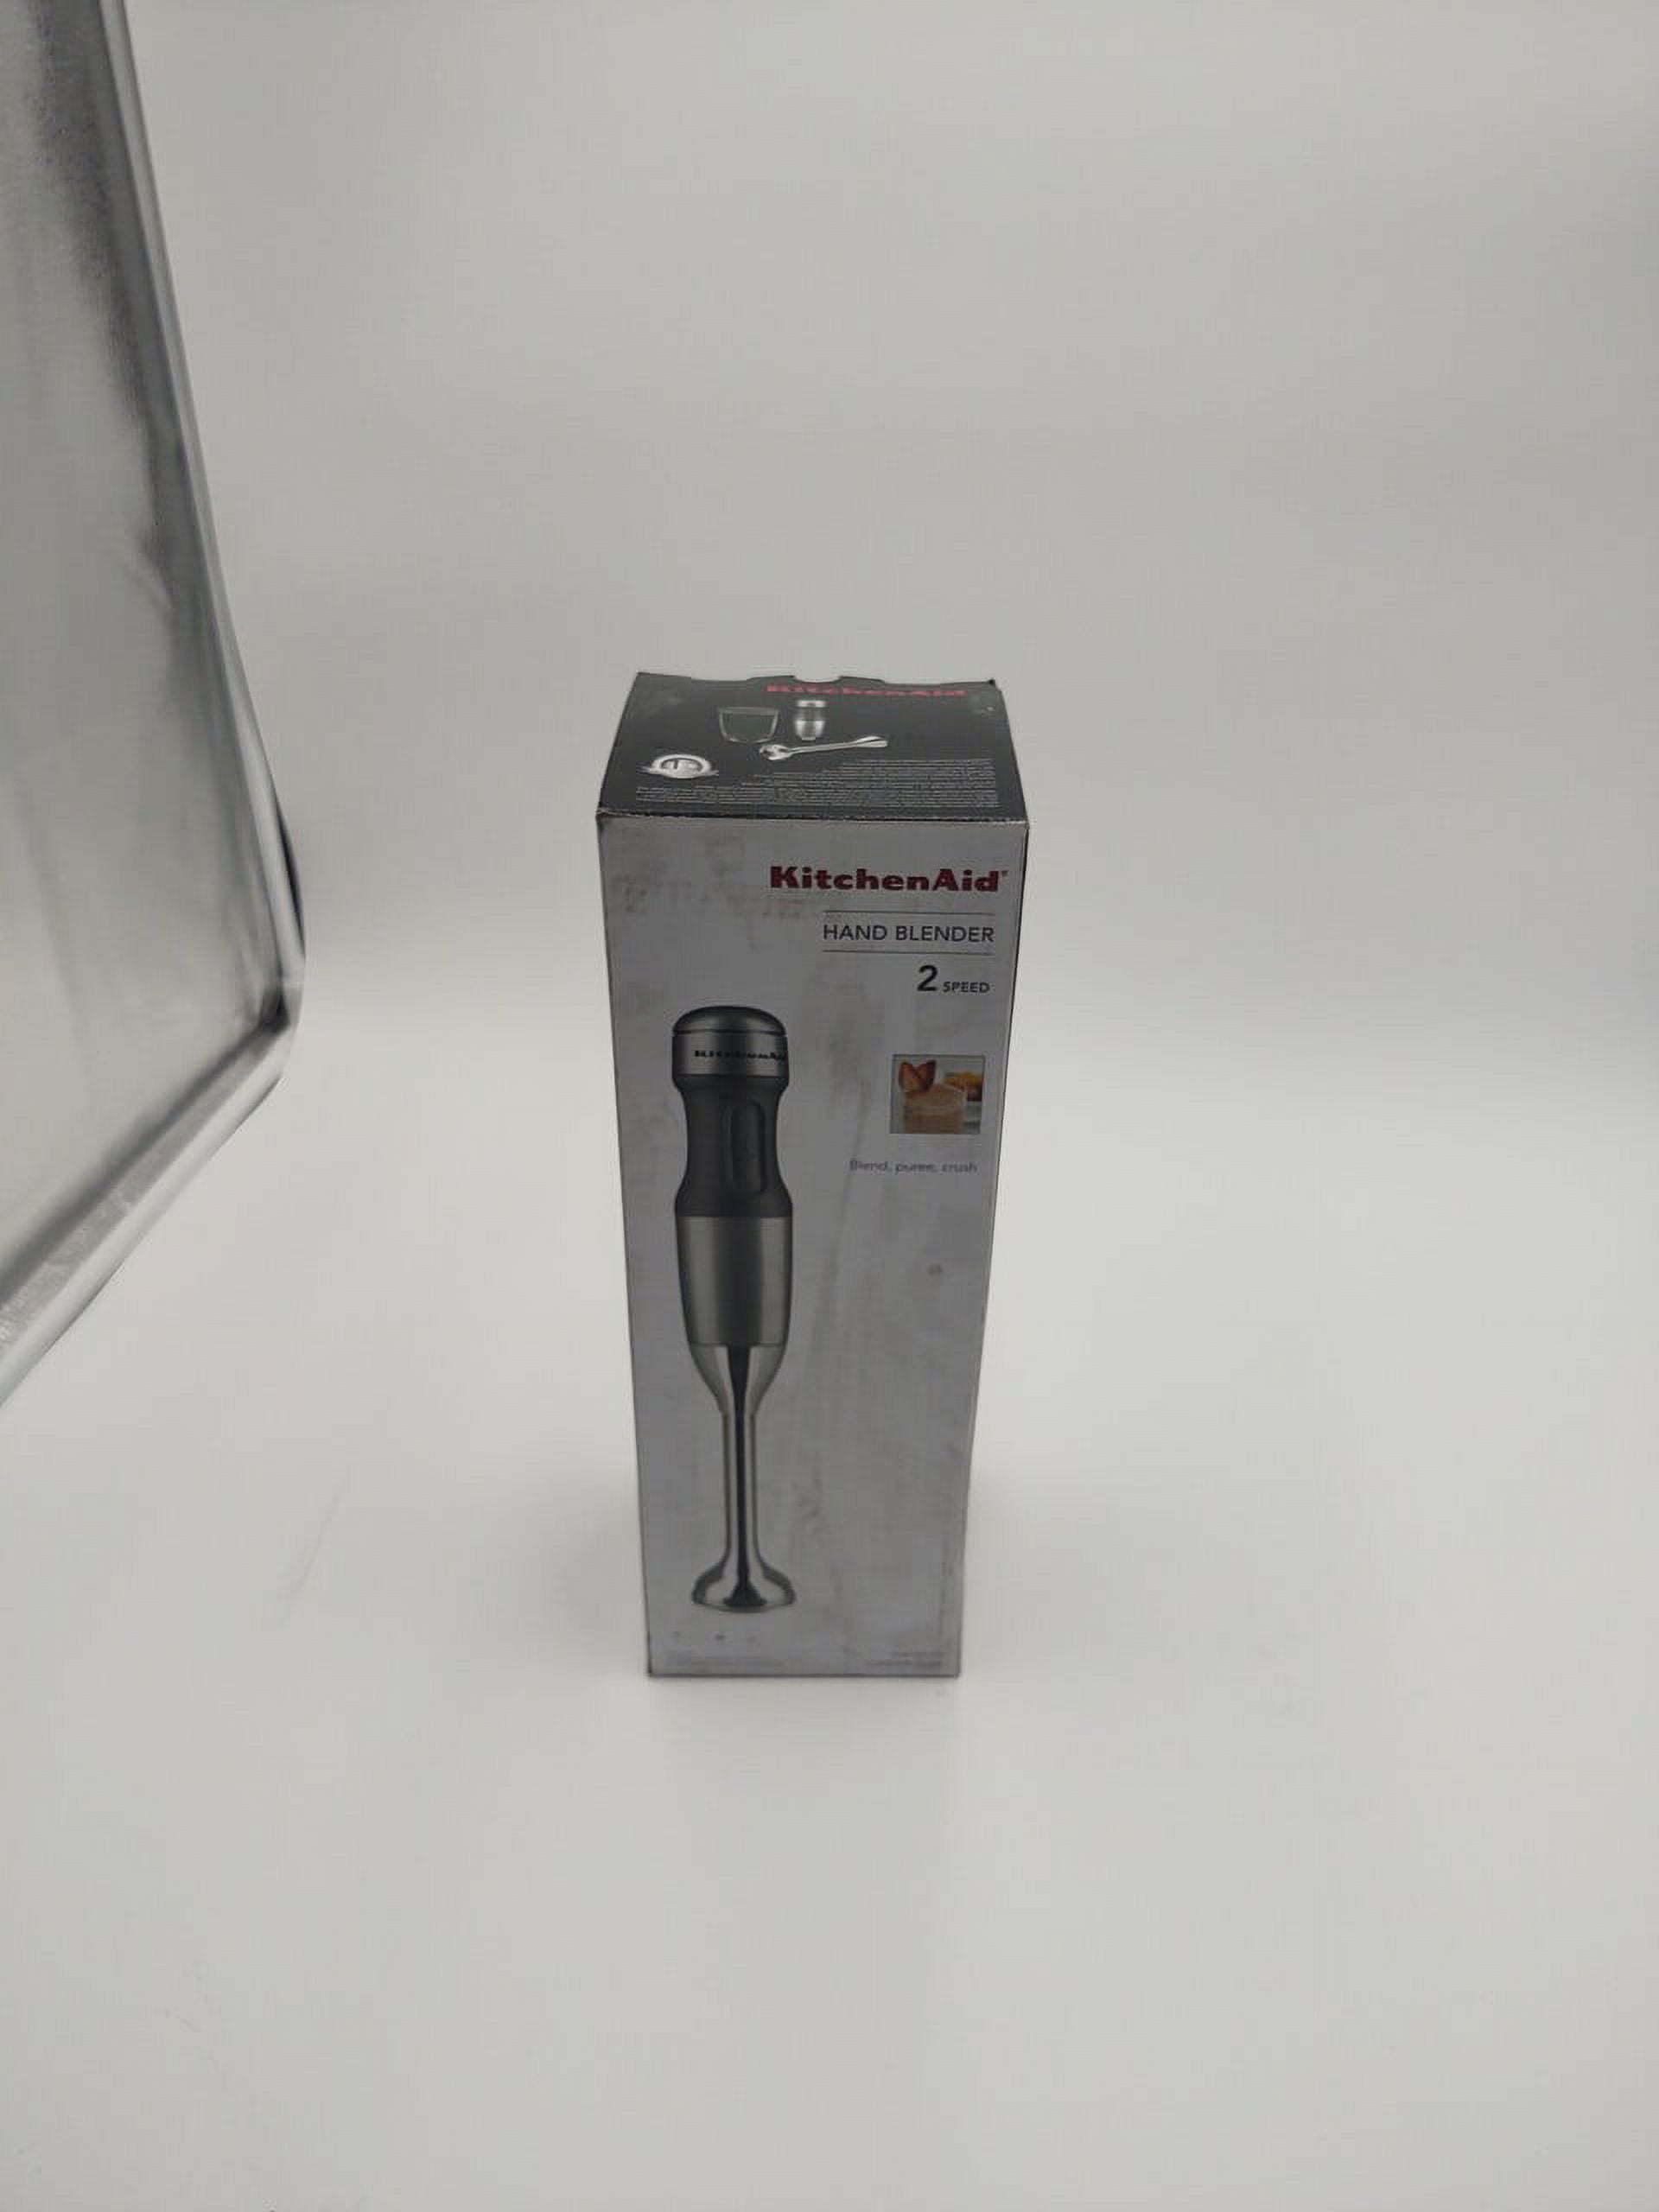 KitchenAid KHB1231CU 2-Speed Hand Blender MOTOR And CUP ONLY